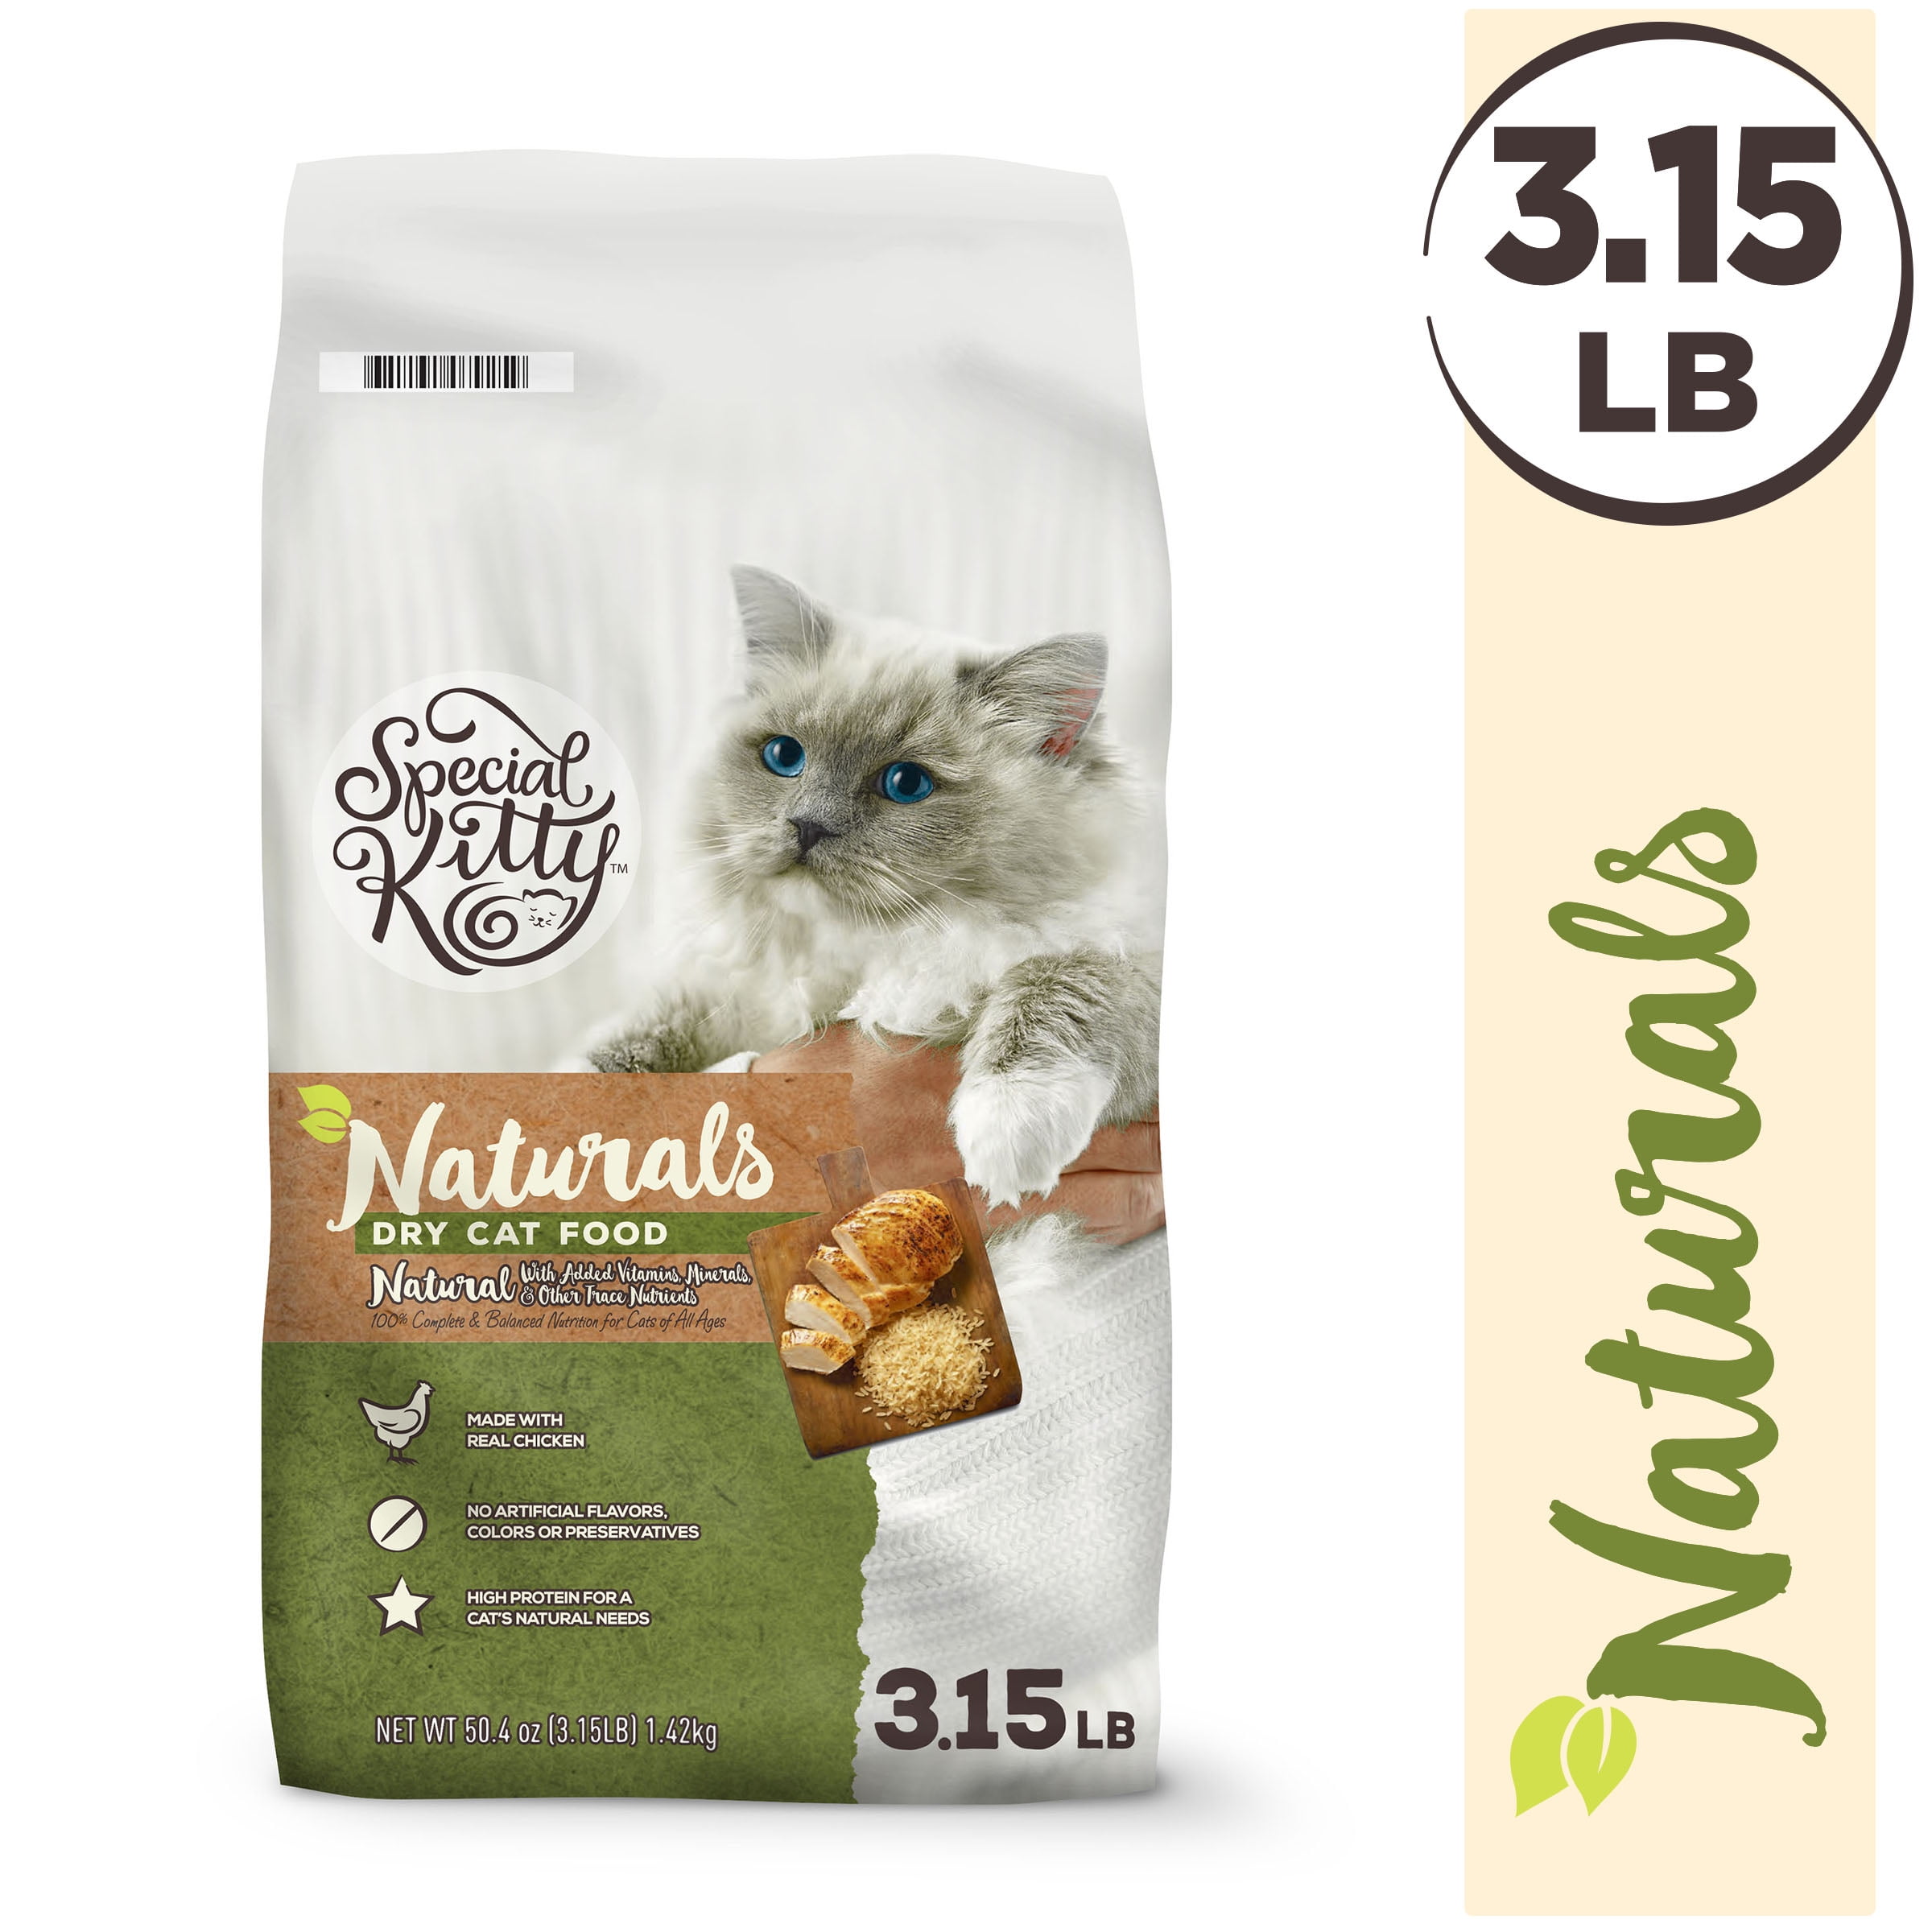 Special Kitty Naturals Dry Cat Food, Chicken, 3.15 lb